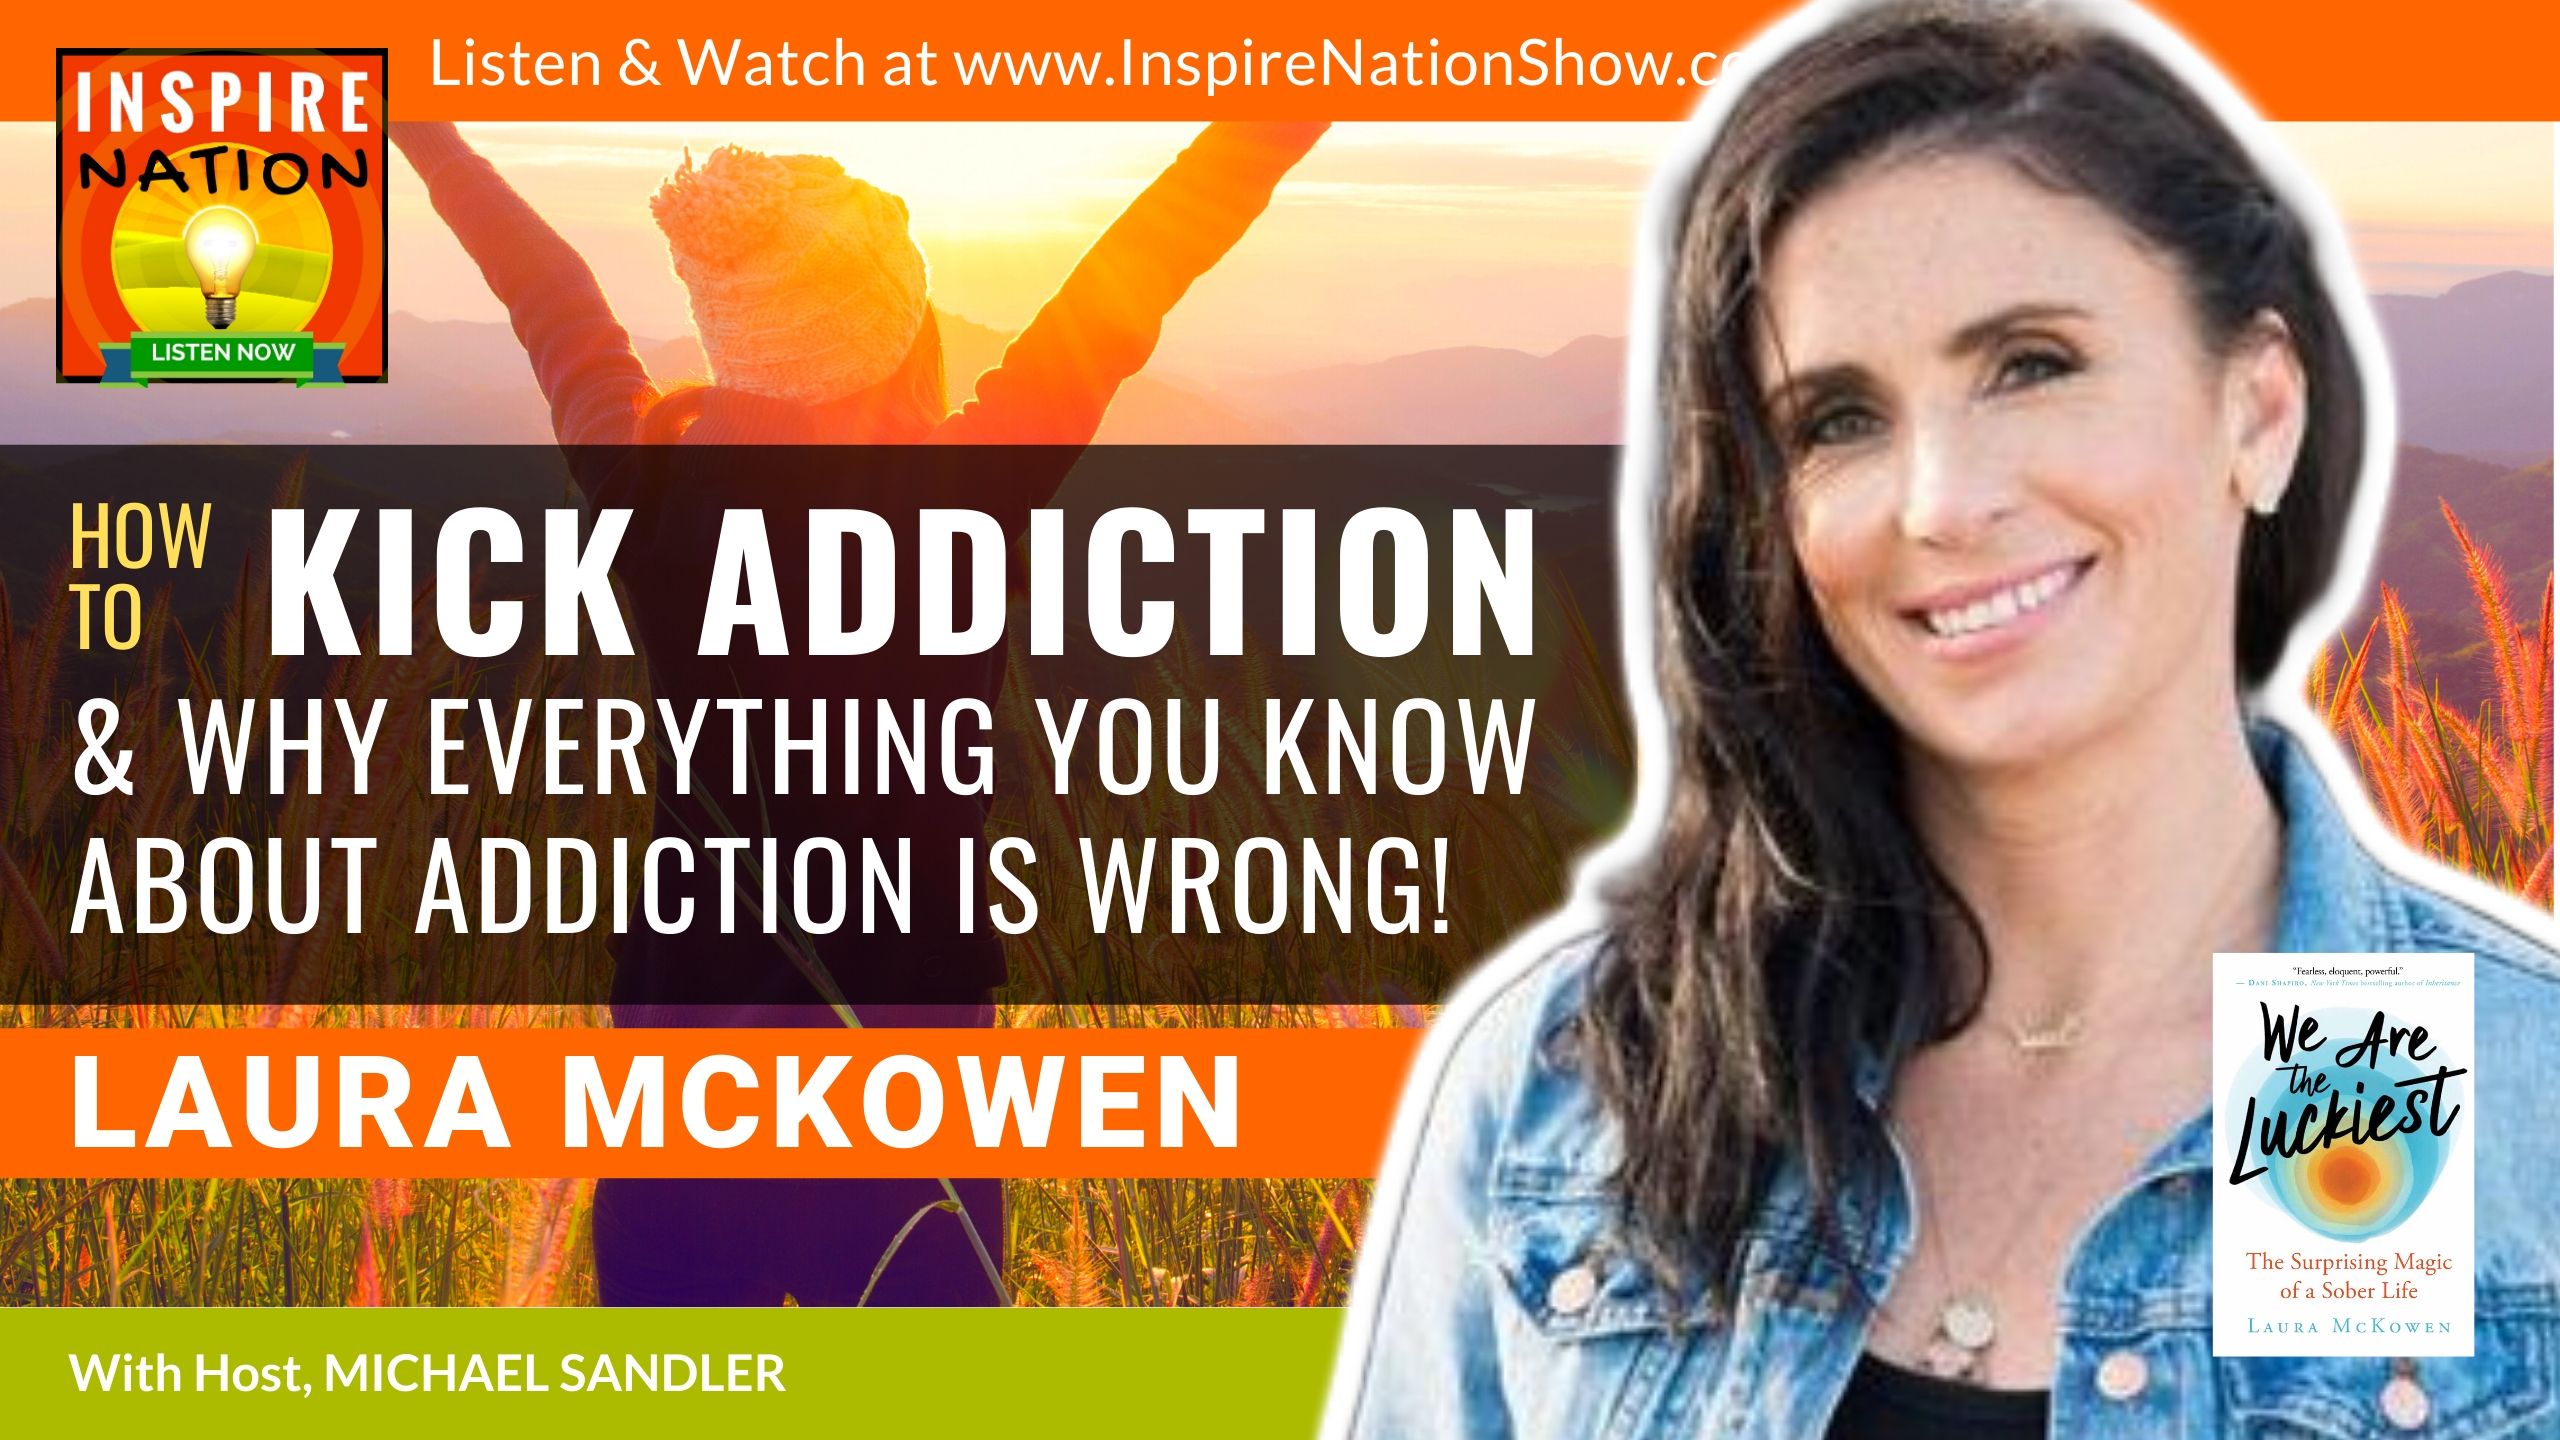 Michael Sandler interviews Laura McKowen on how to kick addiction and why everything you thought about addiction is wrong!